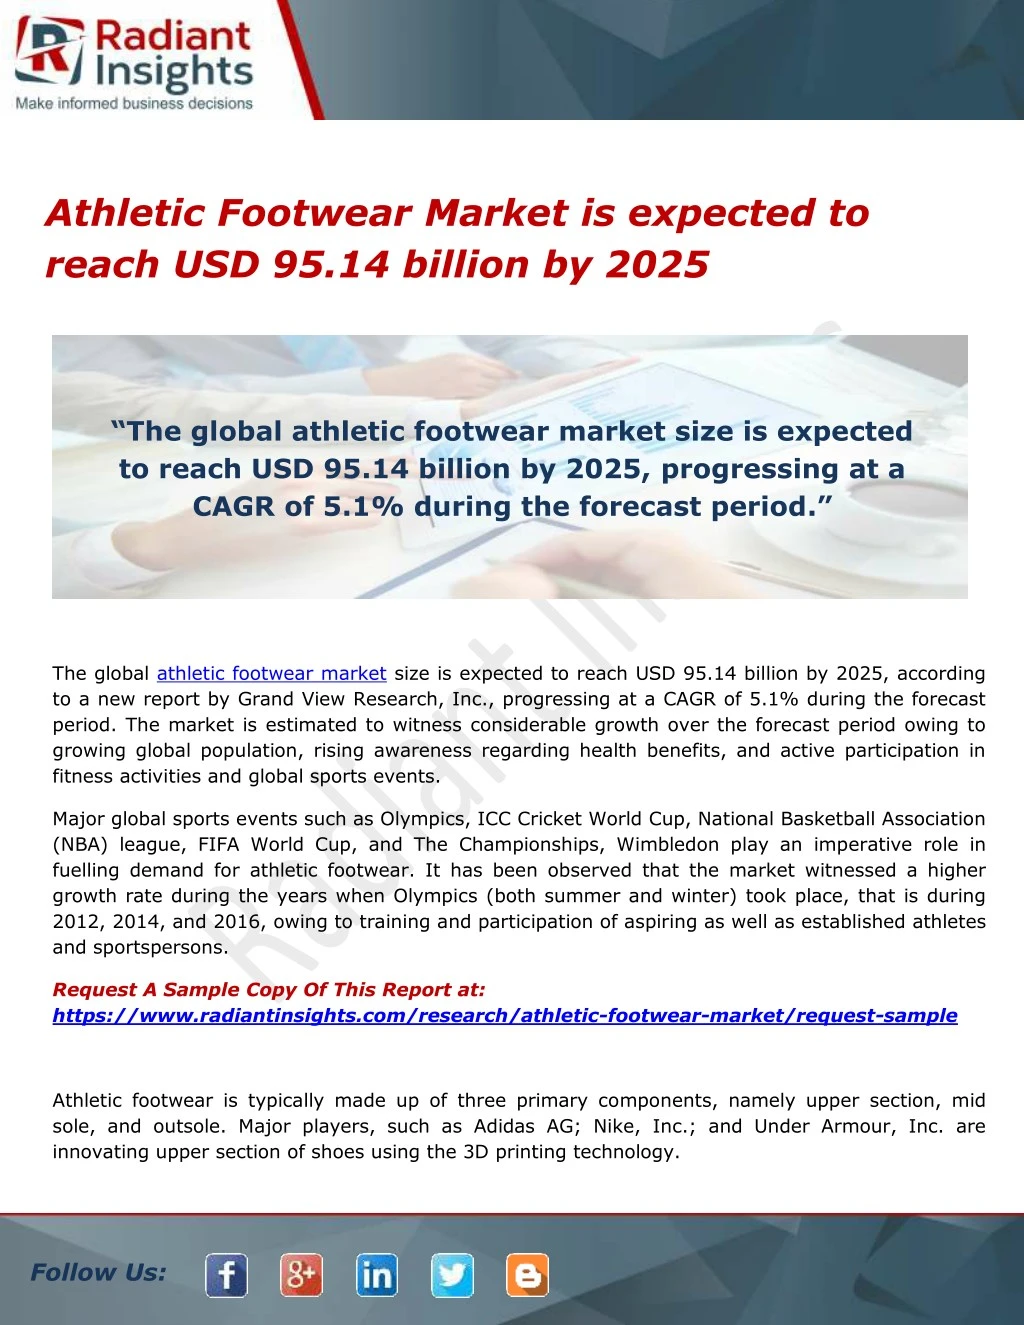 athletic footwear market is expected to reach